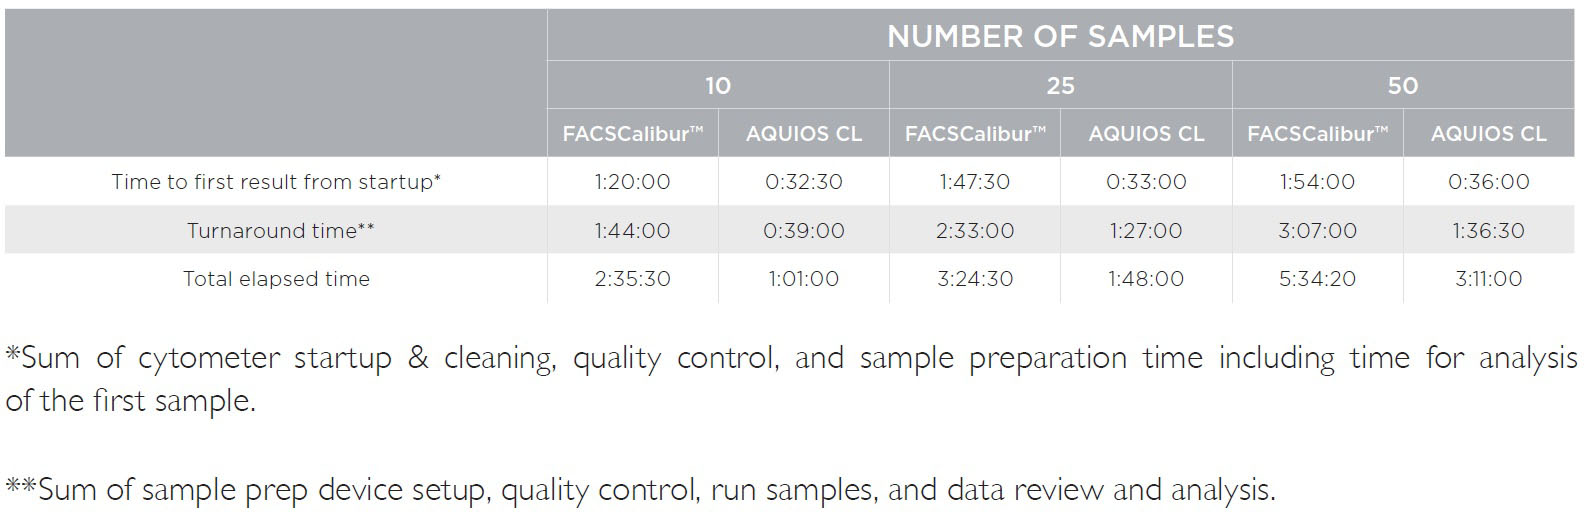 University of Texas medical branch (UTMB) workflow comparison study with the aquios cl flow cytometer Figure 7